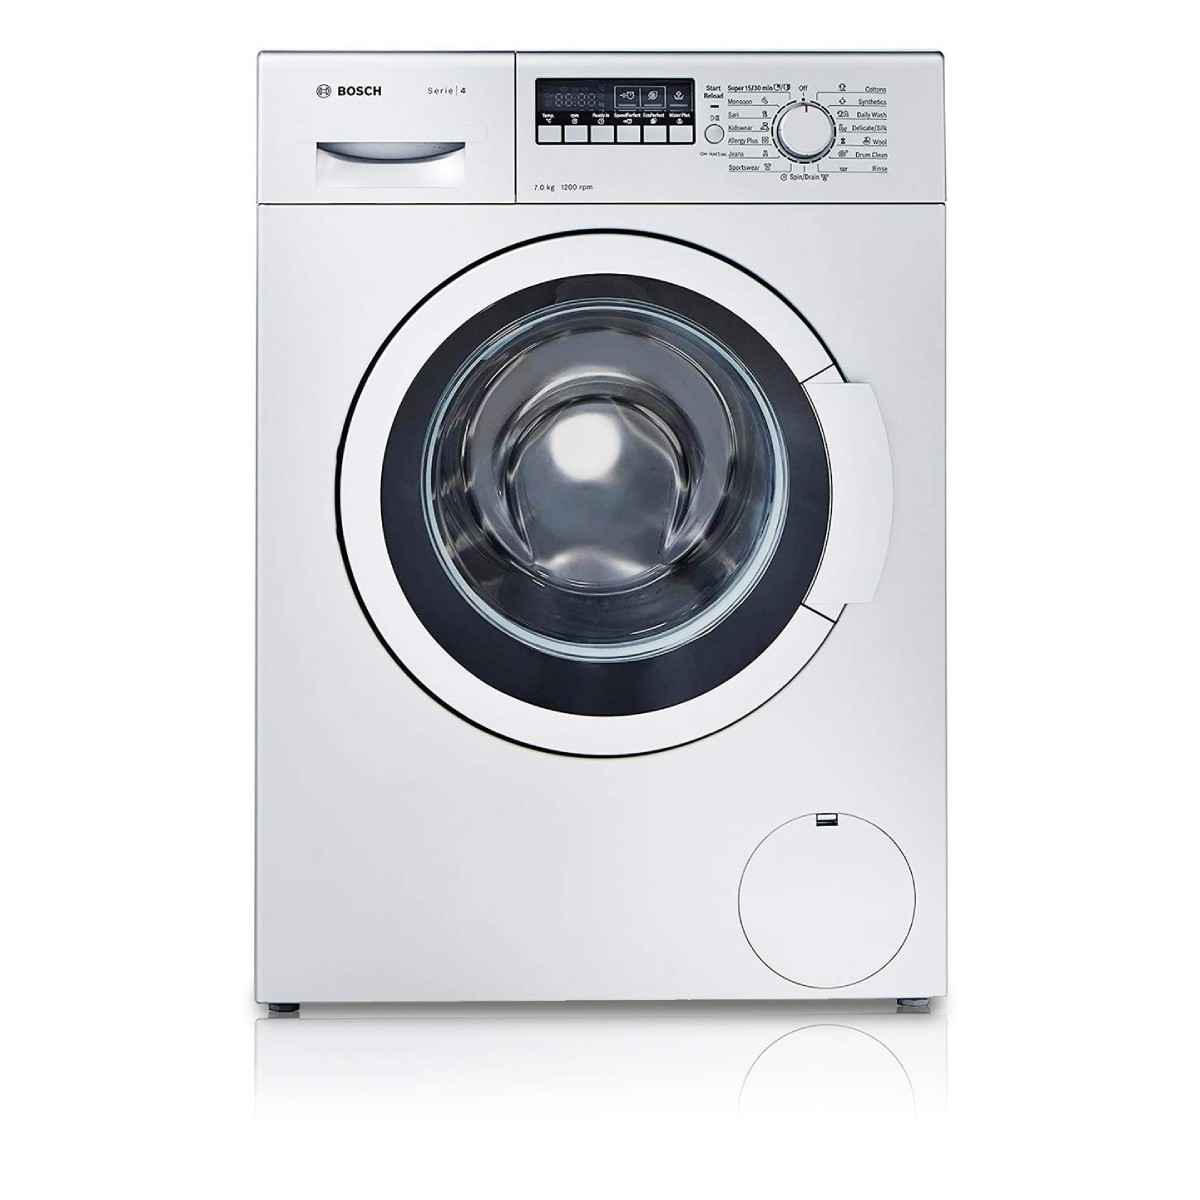 Bosch 7 kg Fully-Automatic Front Loading Washing Machine (WAK24268IN)